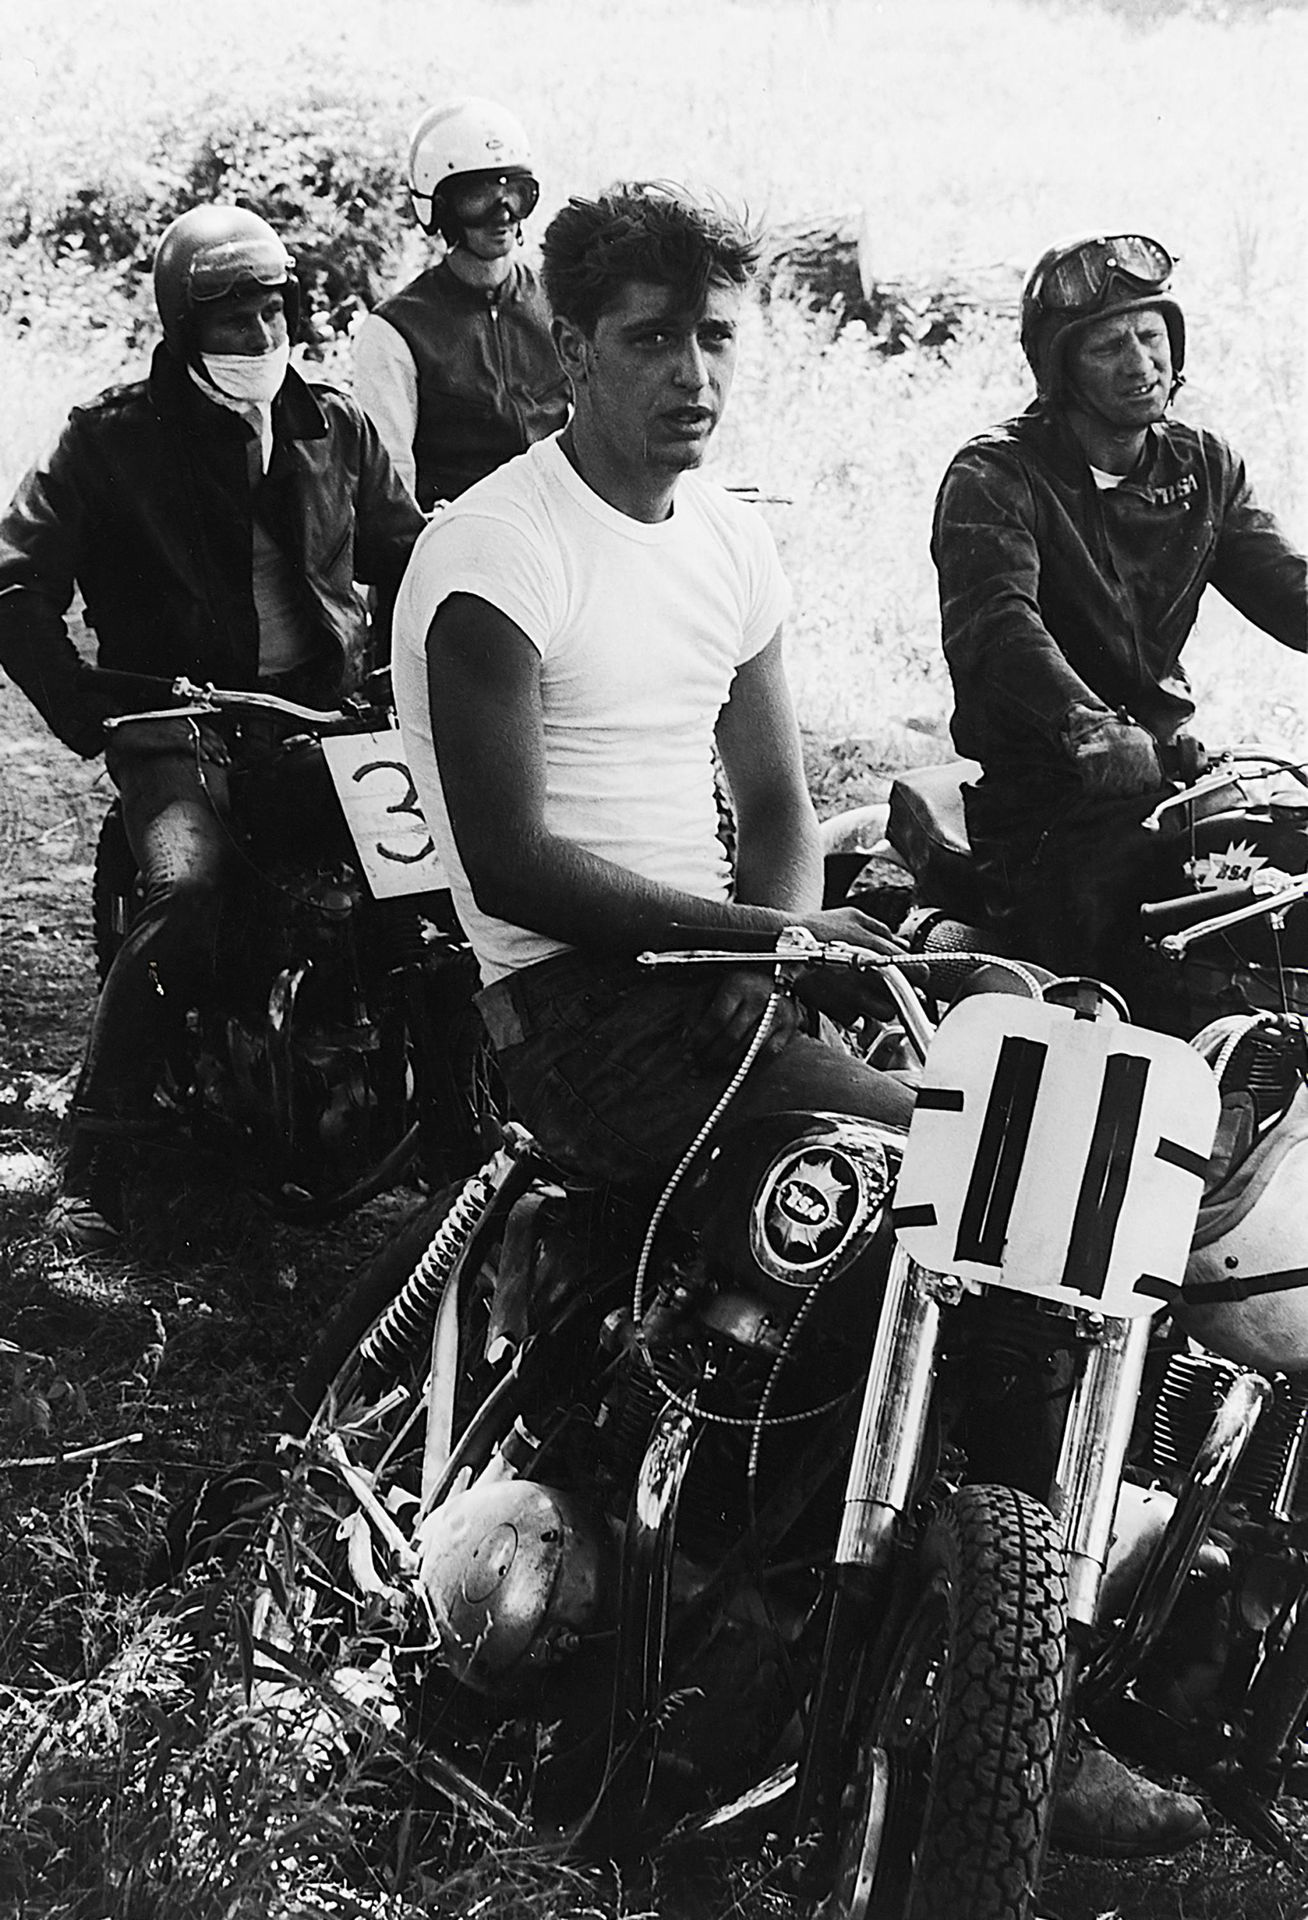 Danny Lyon LYON, DANNY
1942 USA

Title: McHenry, Illinois. 
Subtitle: From the S&hellip;